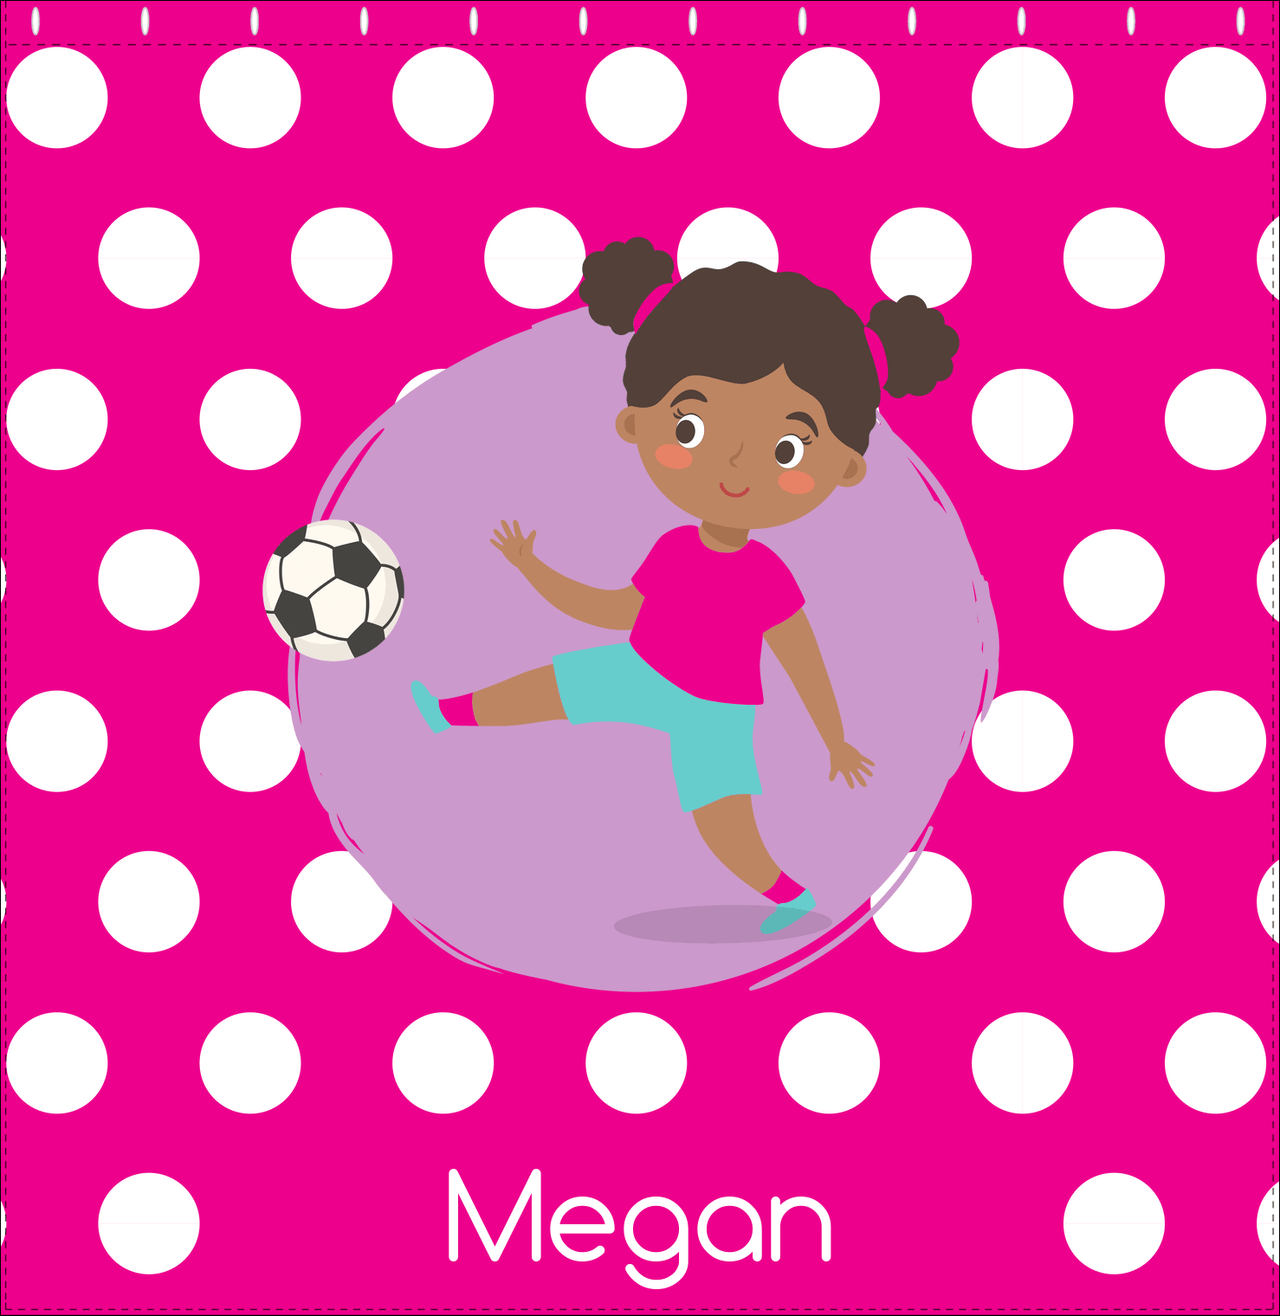 Personalized Soccer Shower Curtain XXIII - Pink Background - Black Girl - Decorate View